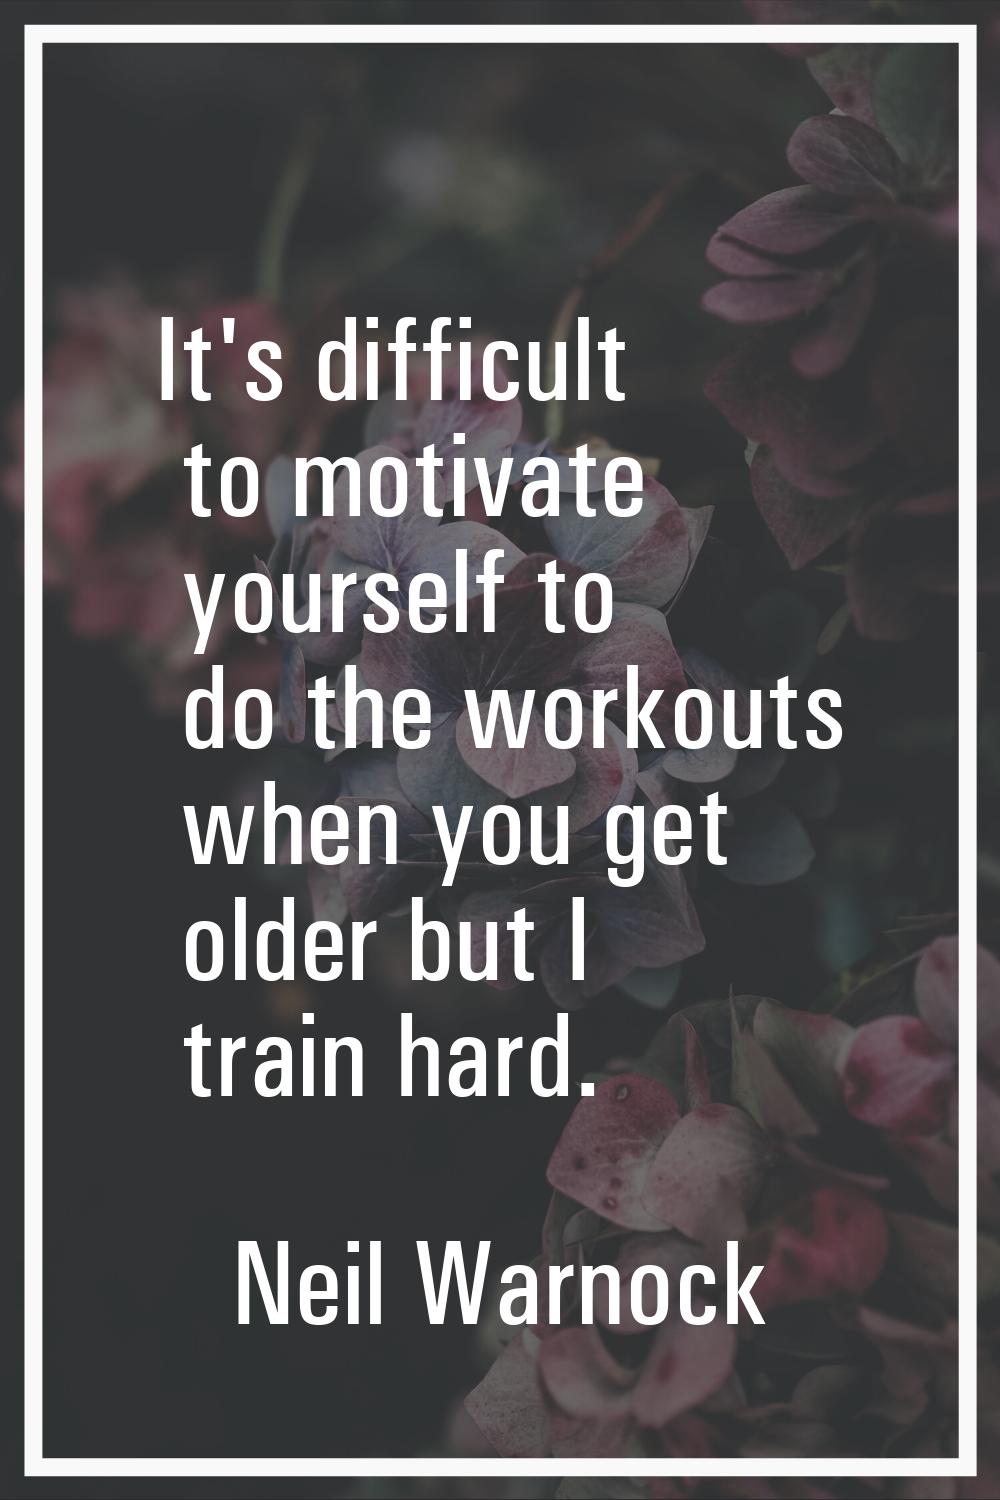 It's difficult to motivate yourself to do the workouts when you get older but I train hard.